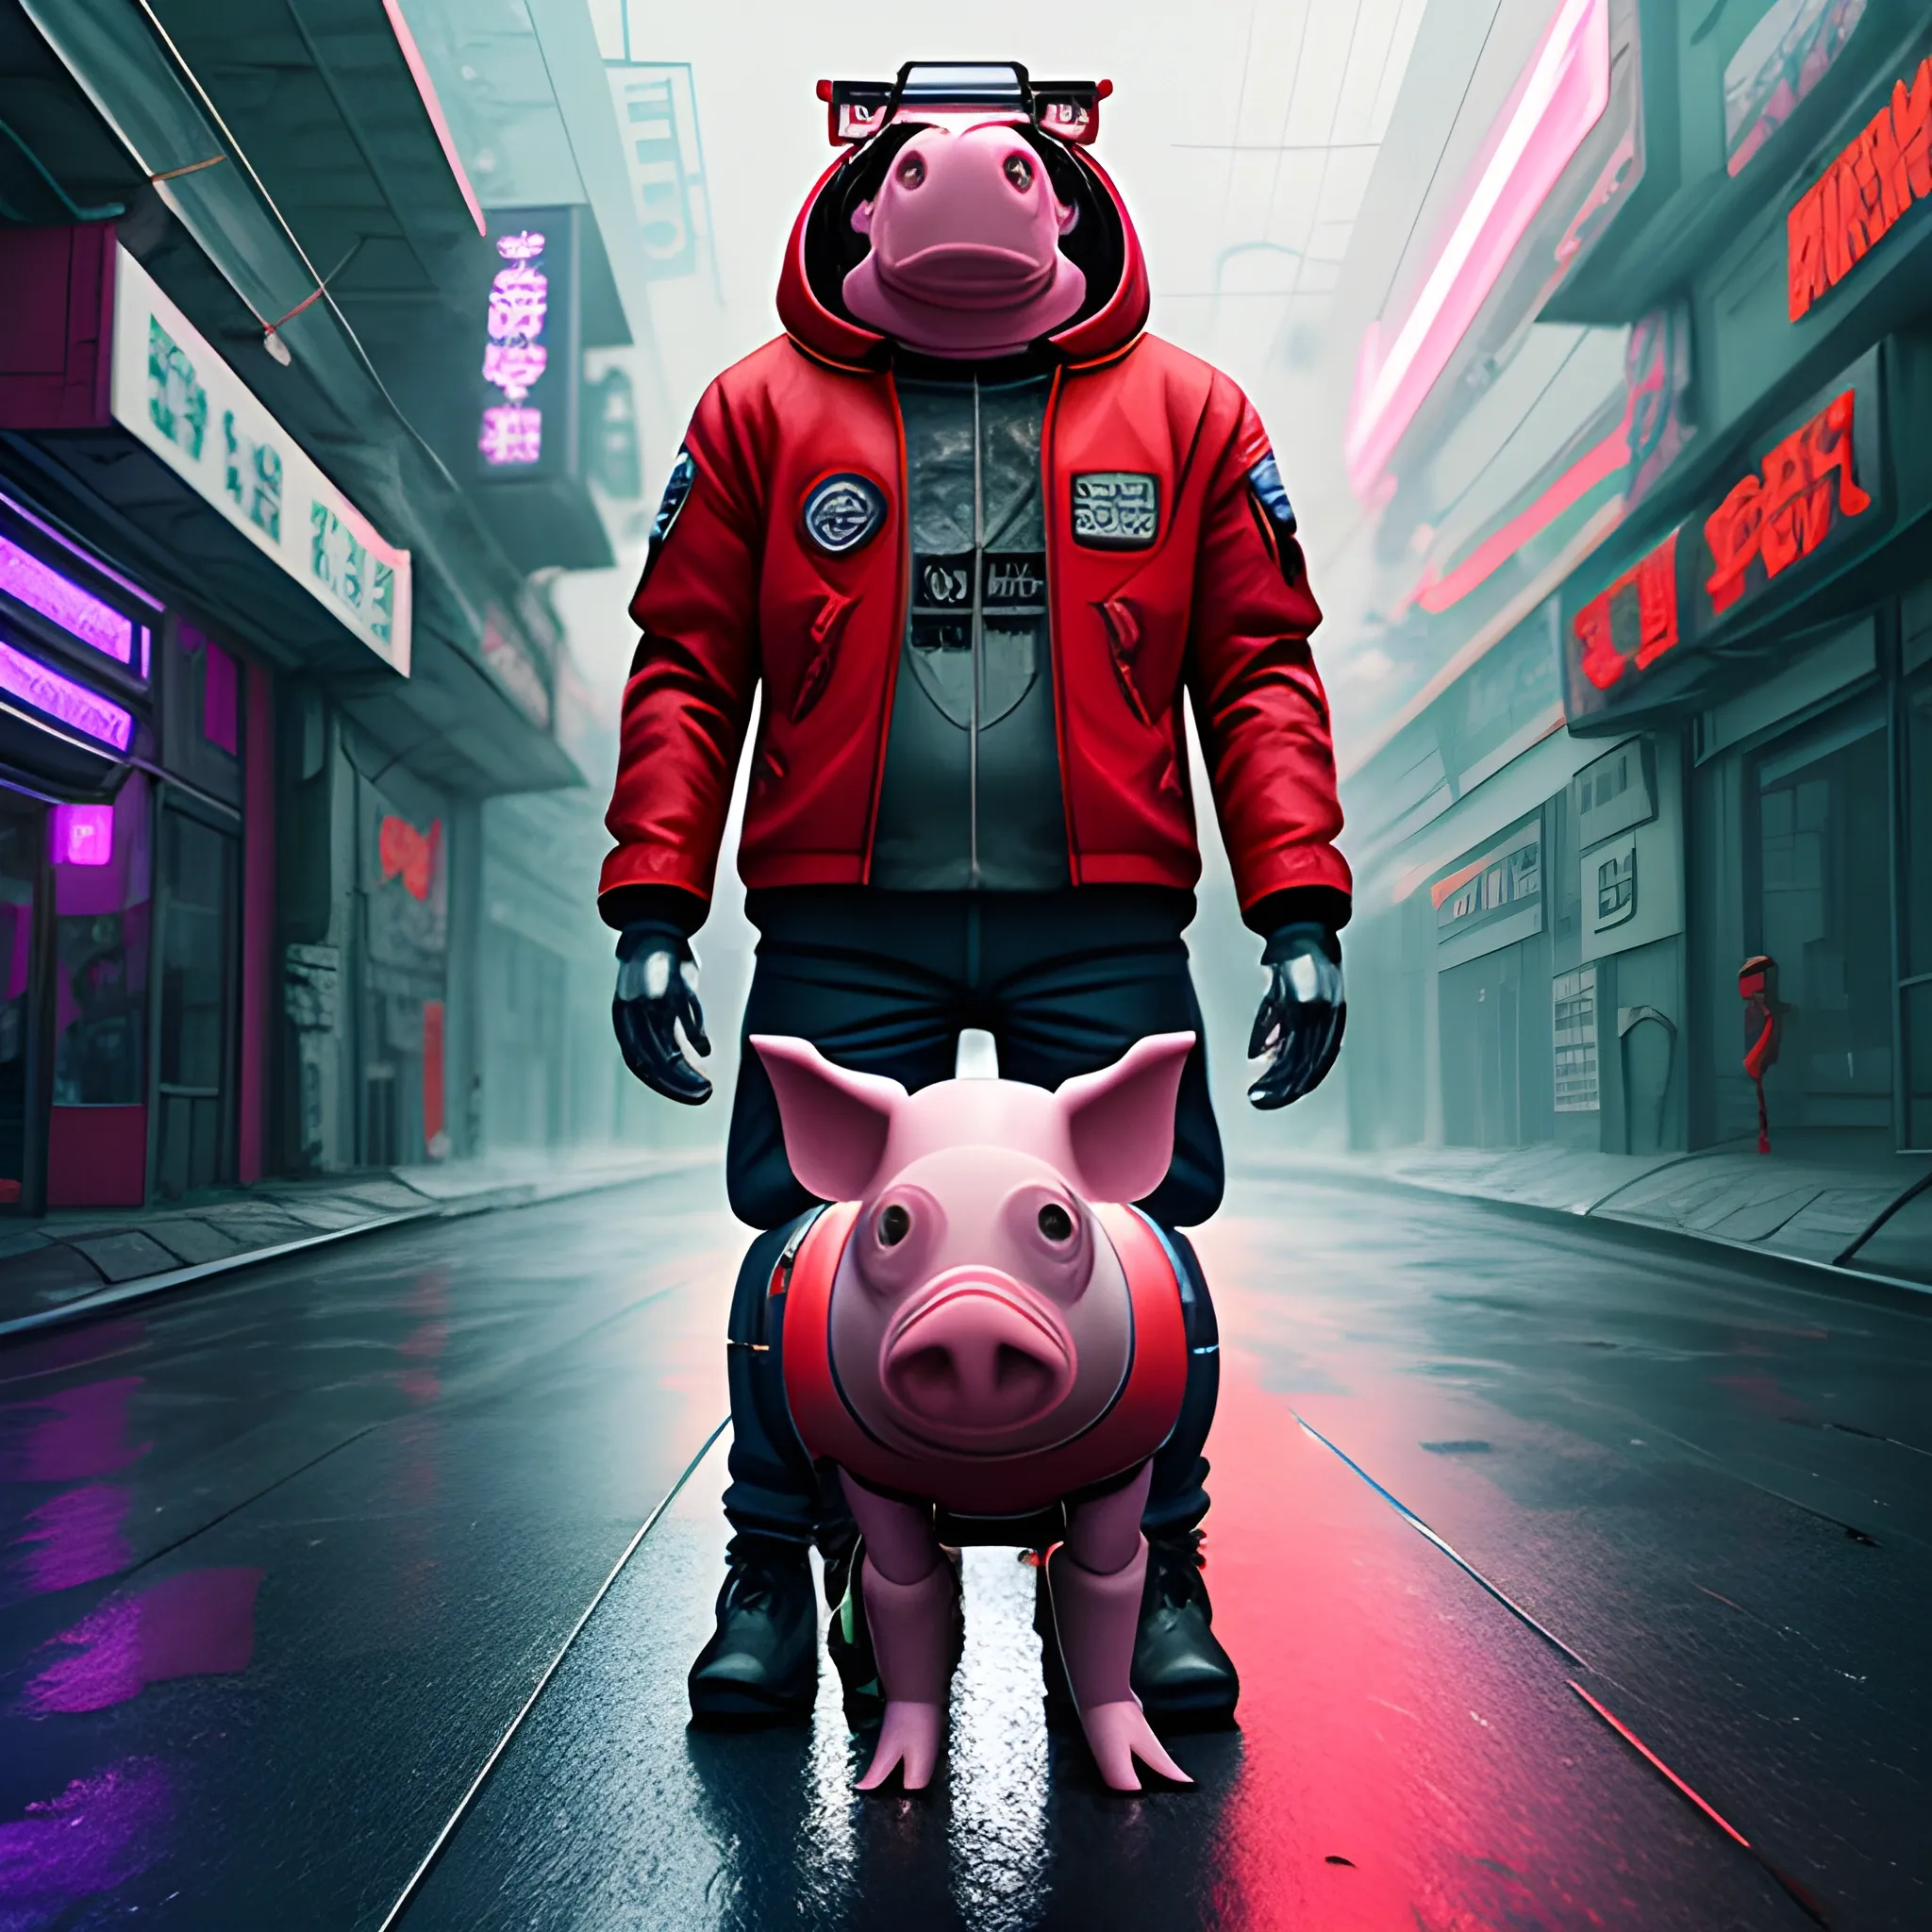 Robot pig in space city, cyberpunk, red jacket in the rain, extremely high quality